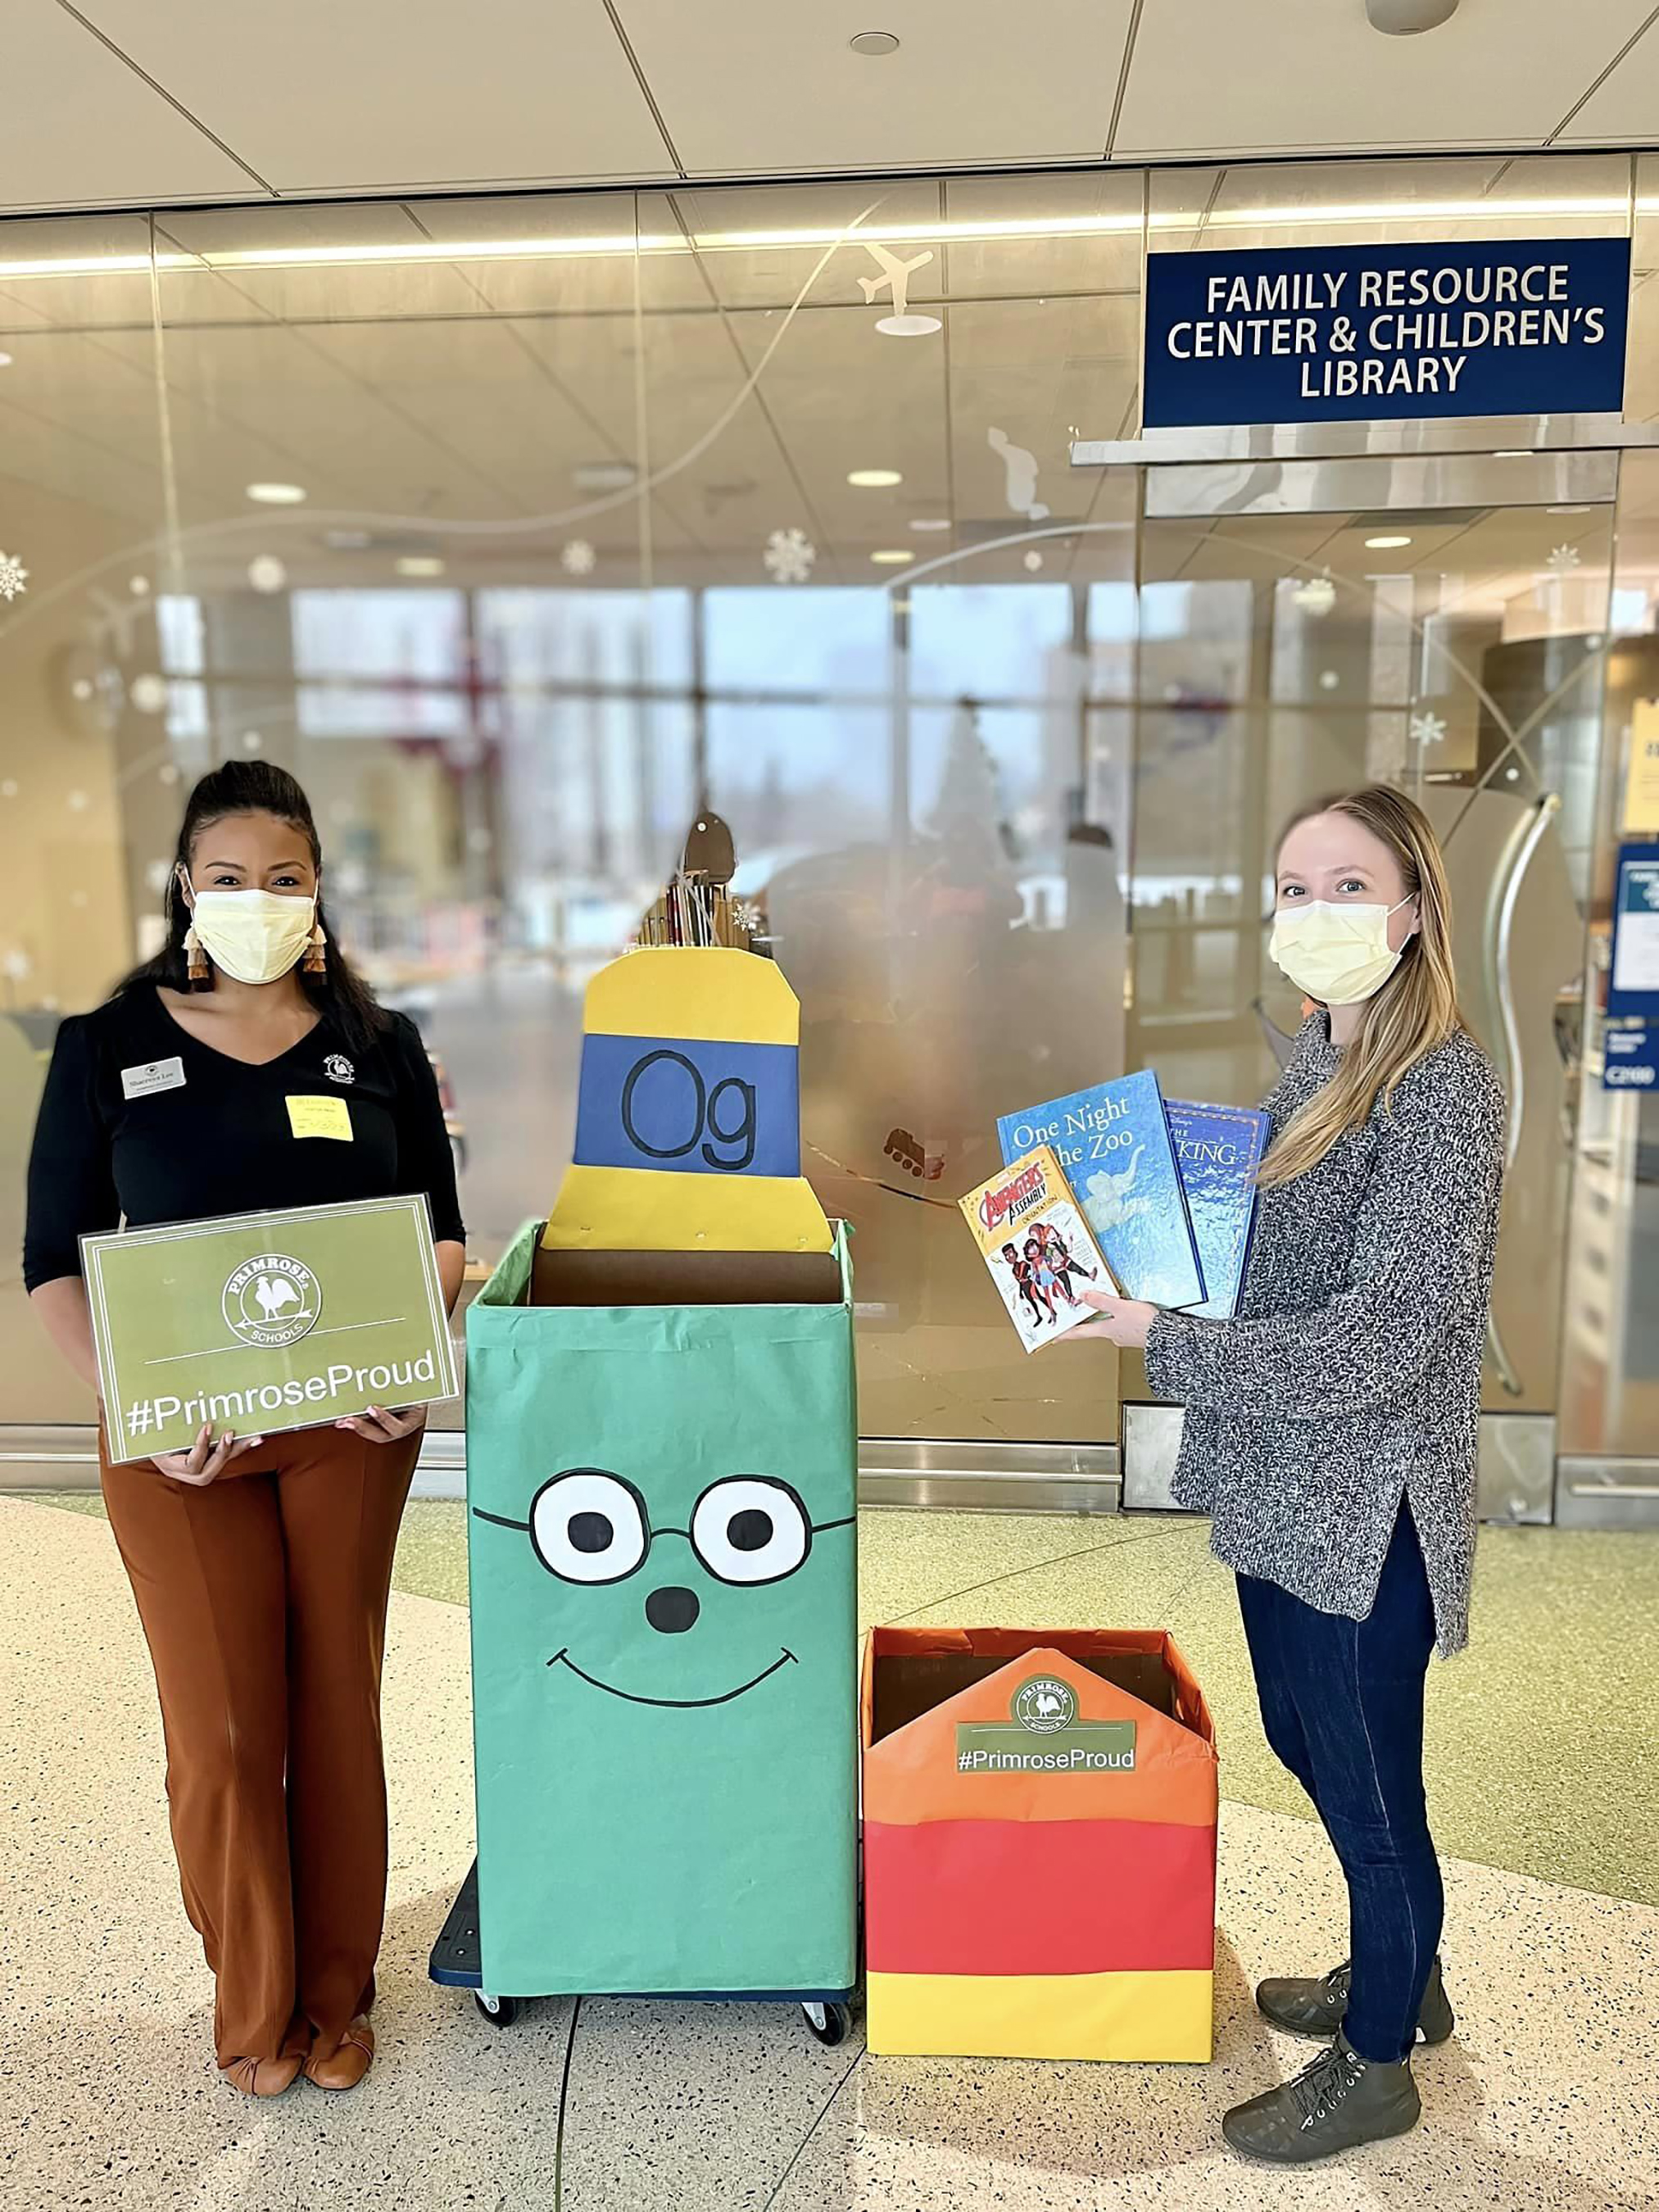 School staff from Primrose School of The Lakes at Blaine (Blaine, MN) drop off books to Masonic Children’s Hospital as part of their Og’s Bountiful Book Drive donation efforts.